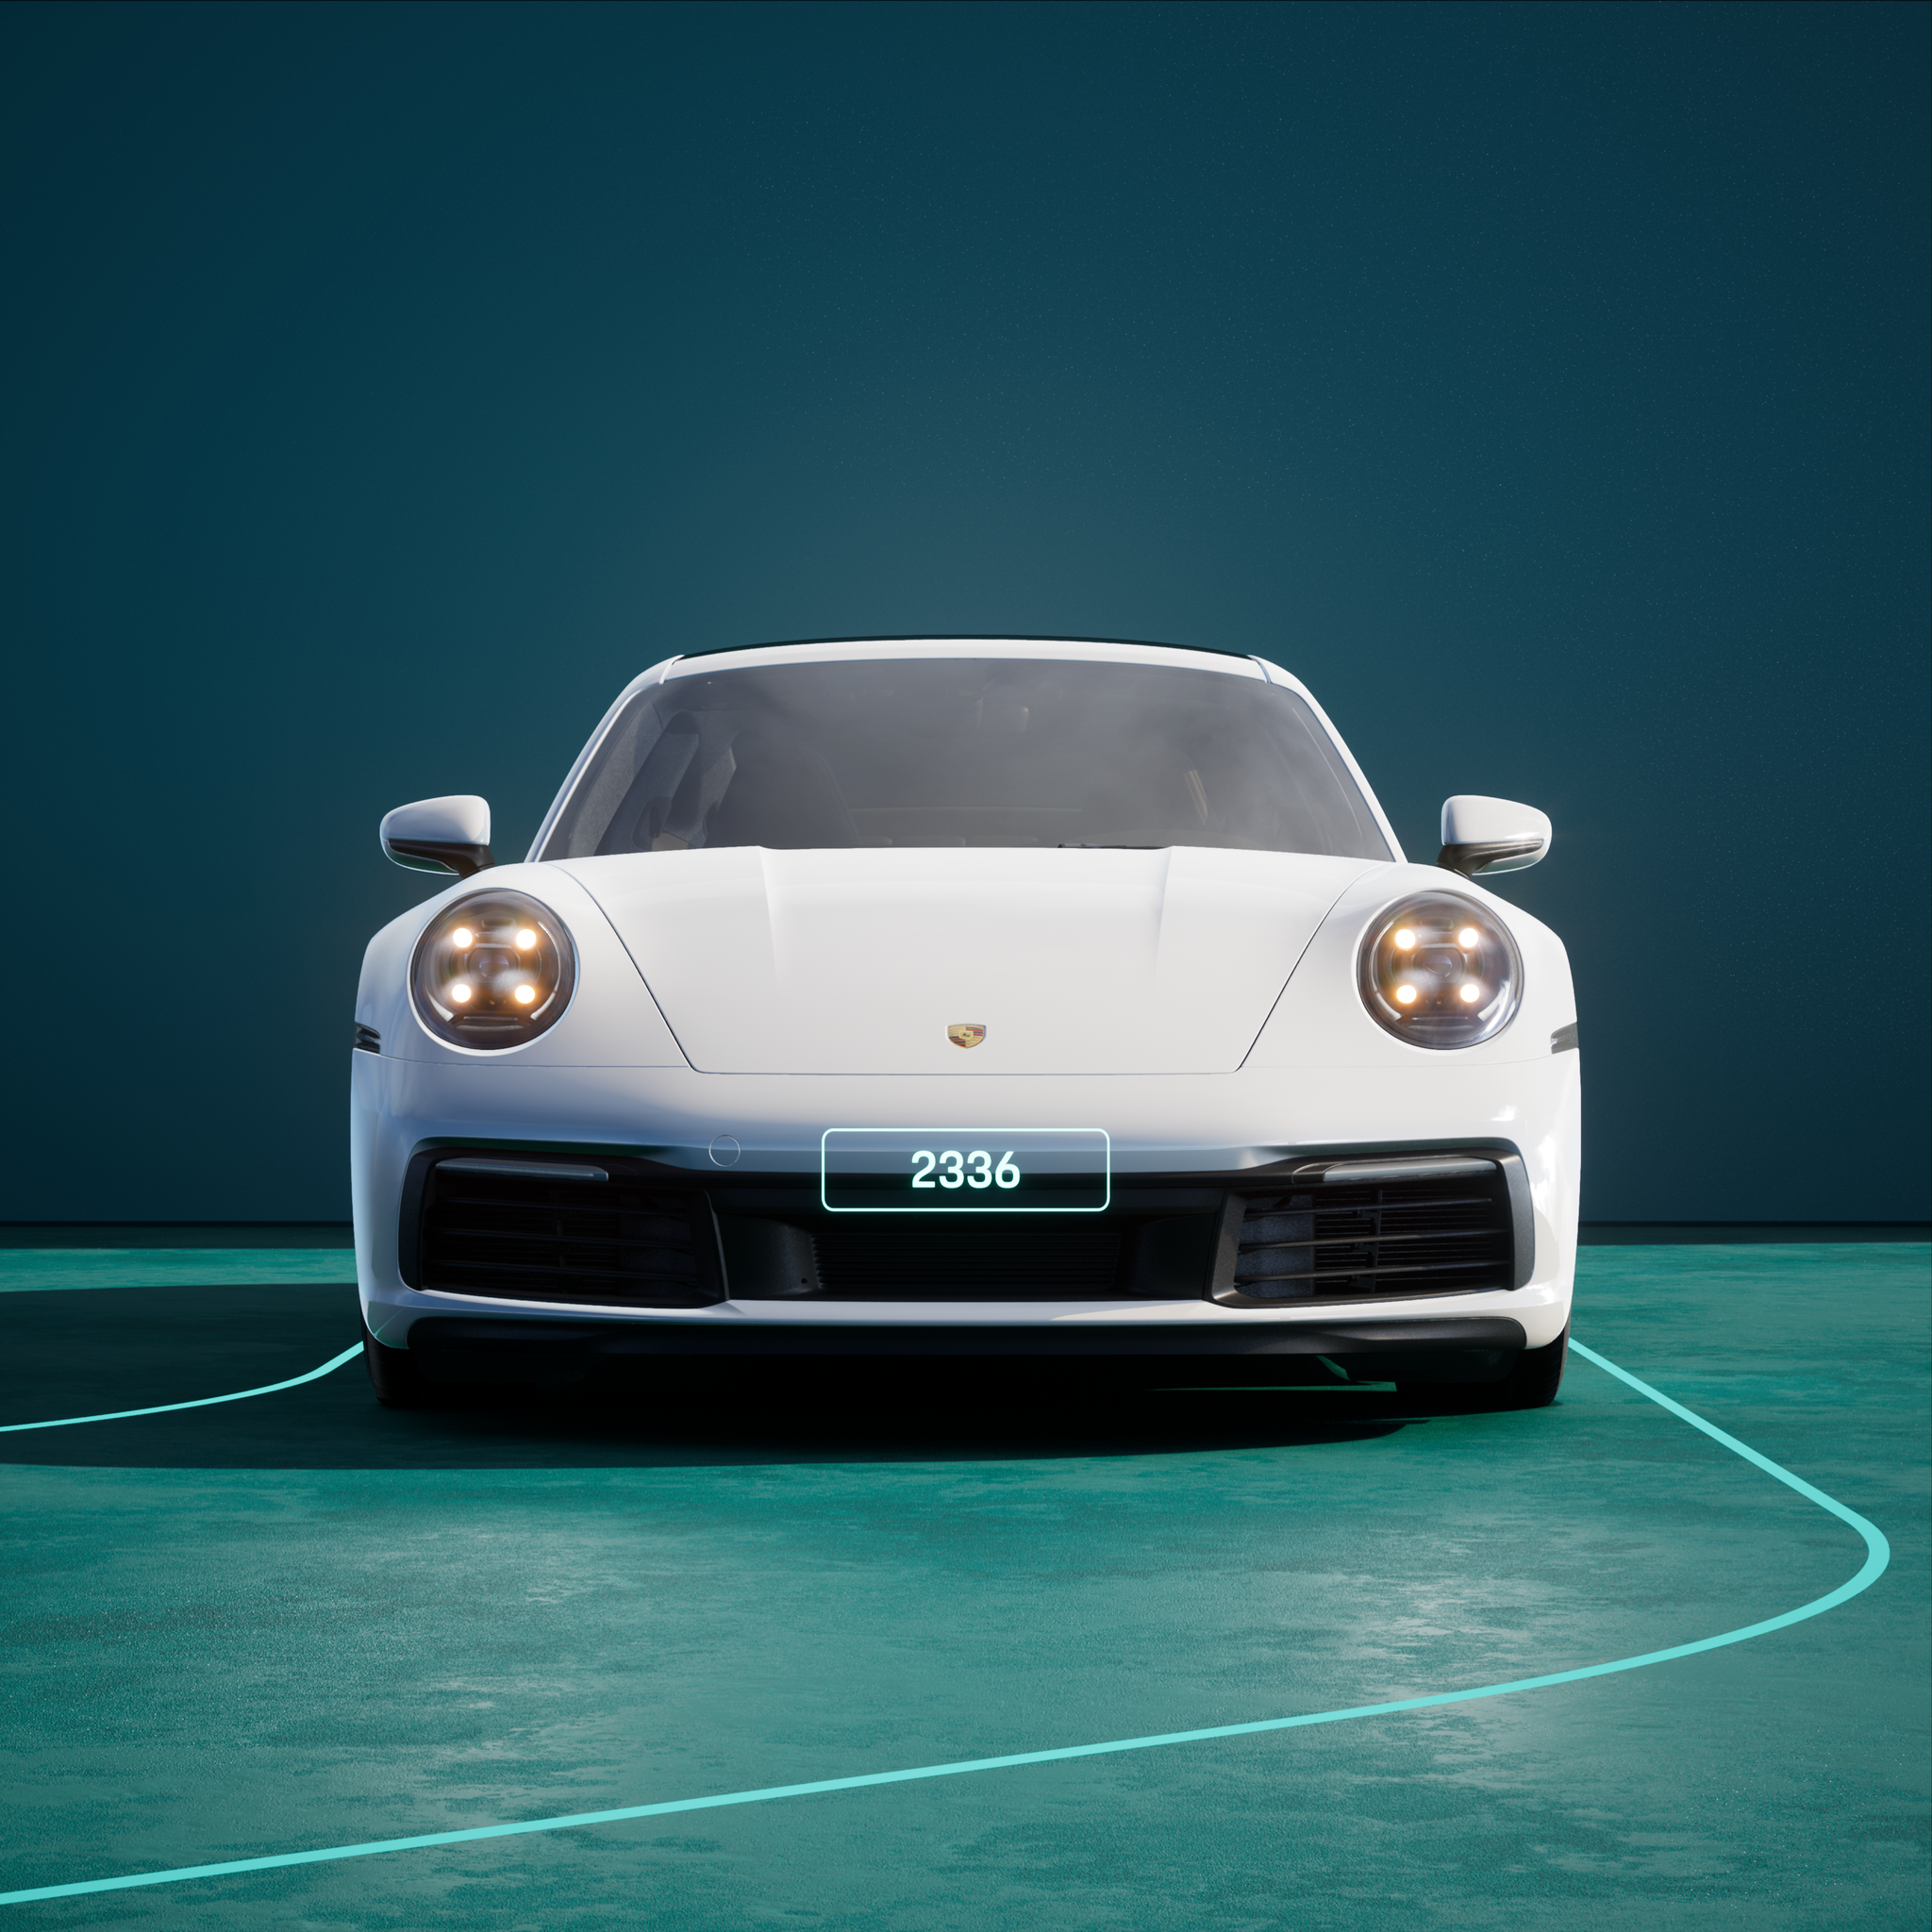 The PORSCHΞ 911 2336 image in phase